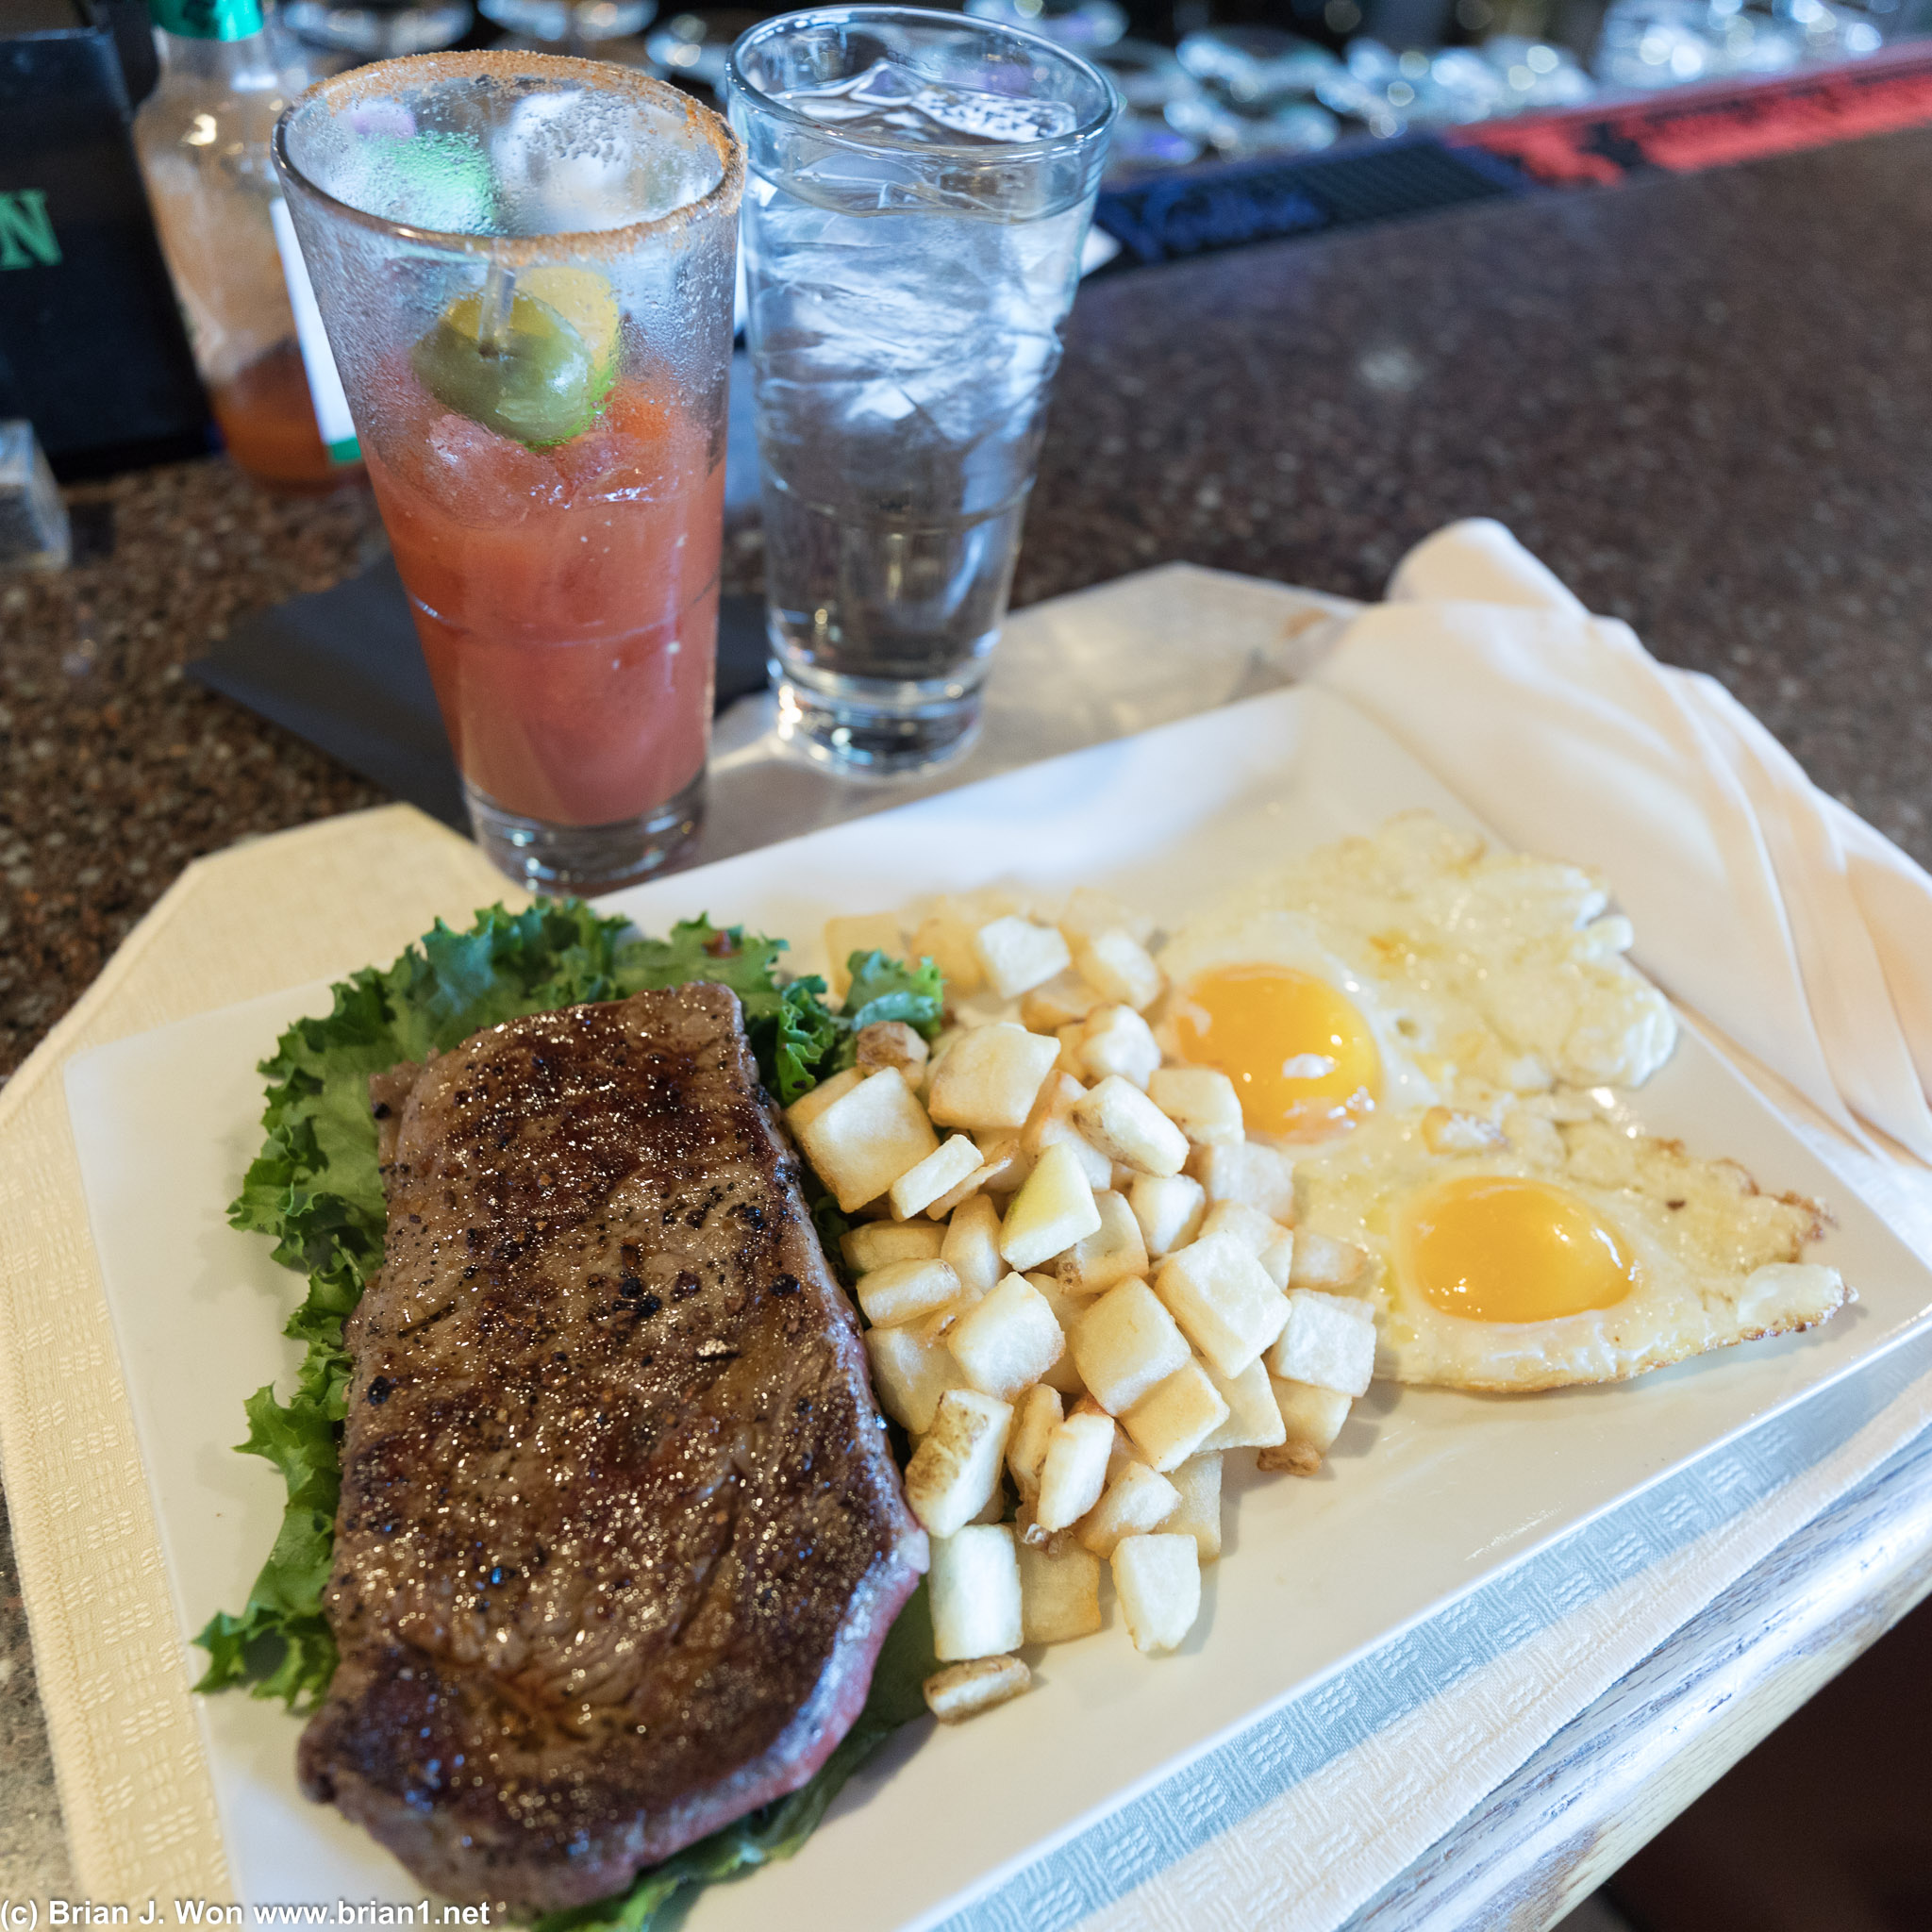 Bloody mary, steak, and eggs. Thanks Priority Pass!